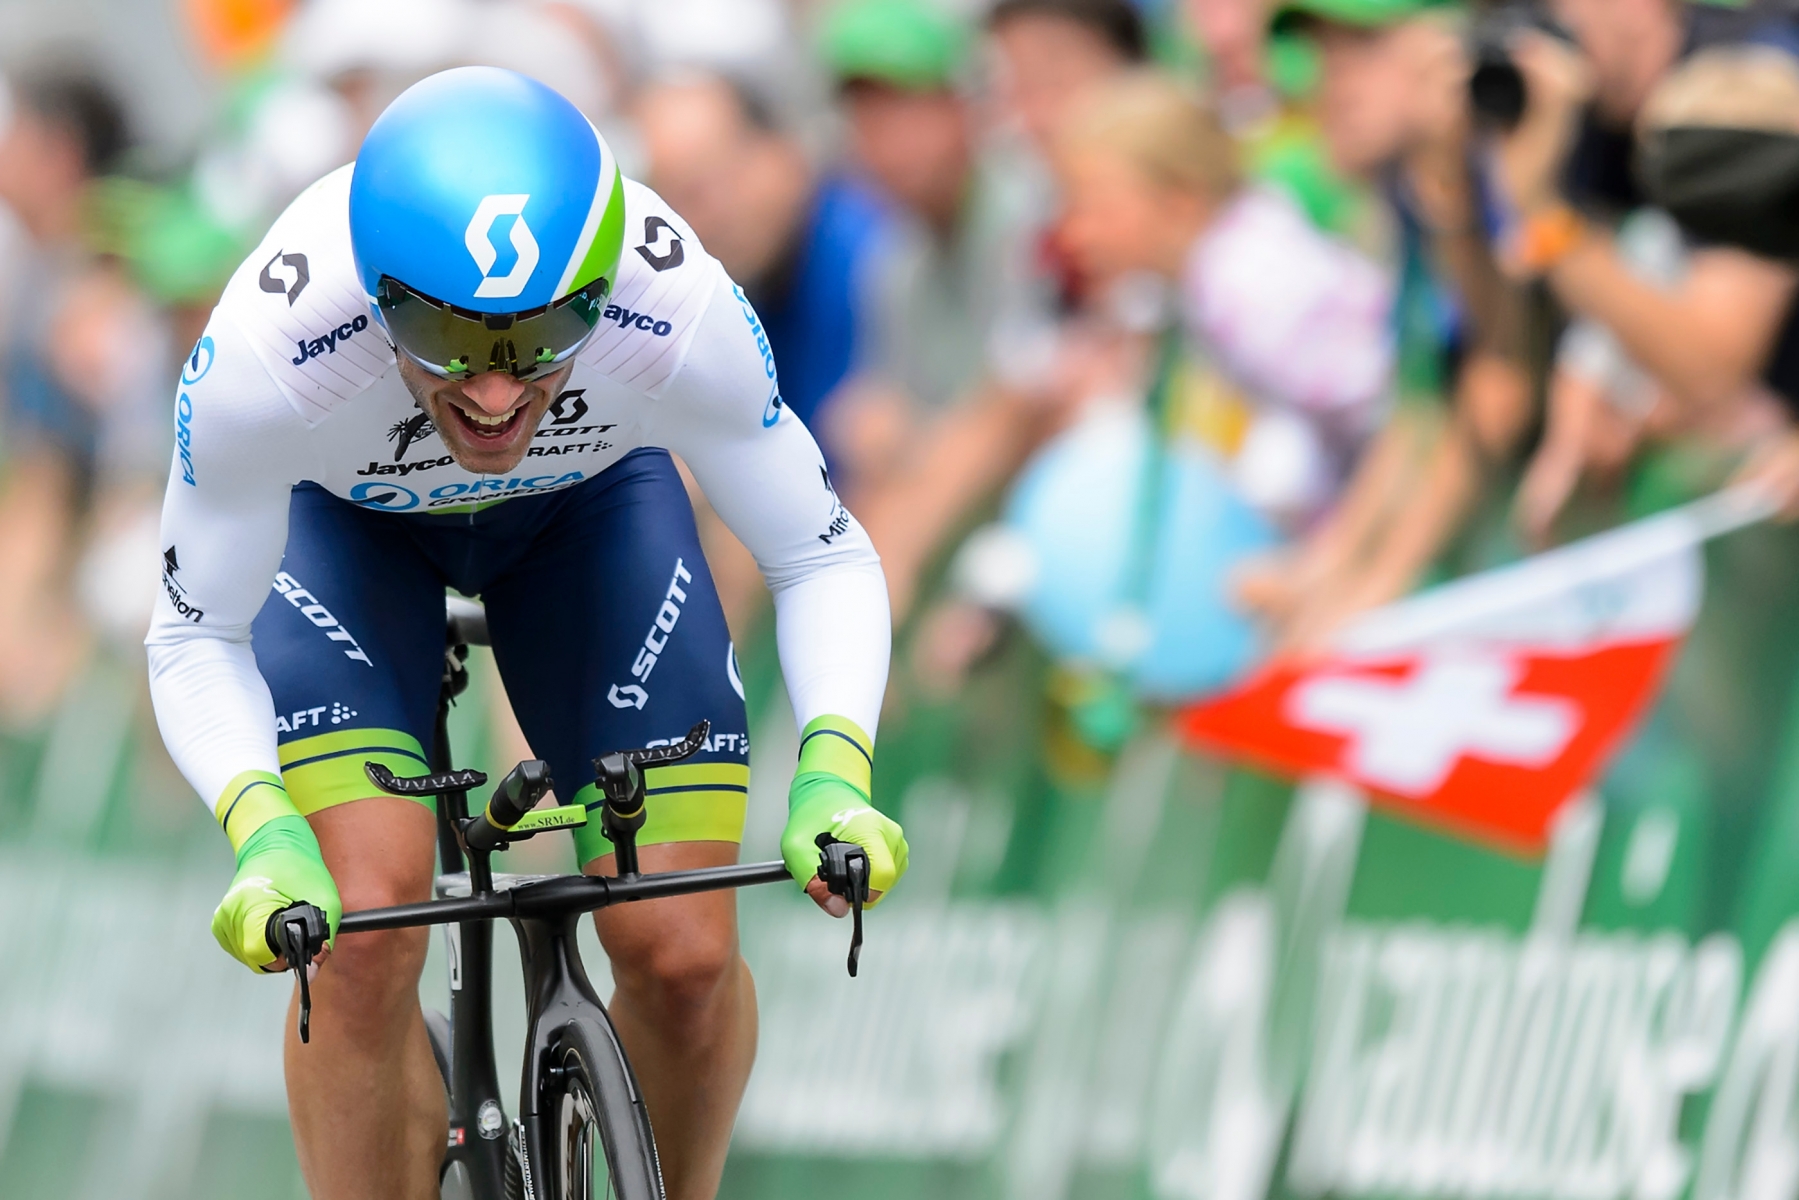 Michael Albasini from Switzerland of team Orica GreenEdge, in action during the 9th and last stage, a 38,4 km race against the clock, from Bern to Bern, at the 79th Tour de Suisse UCI ProTour cycling race, in Bern, Switzerland, Sunday, June 21, 2015. (KEYSTONE/Jean-Christophe Bott)5 RAD TOUR DE SUISSE 2015